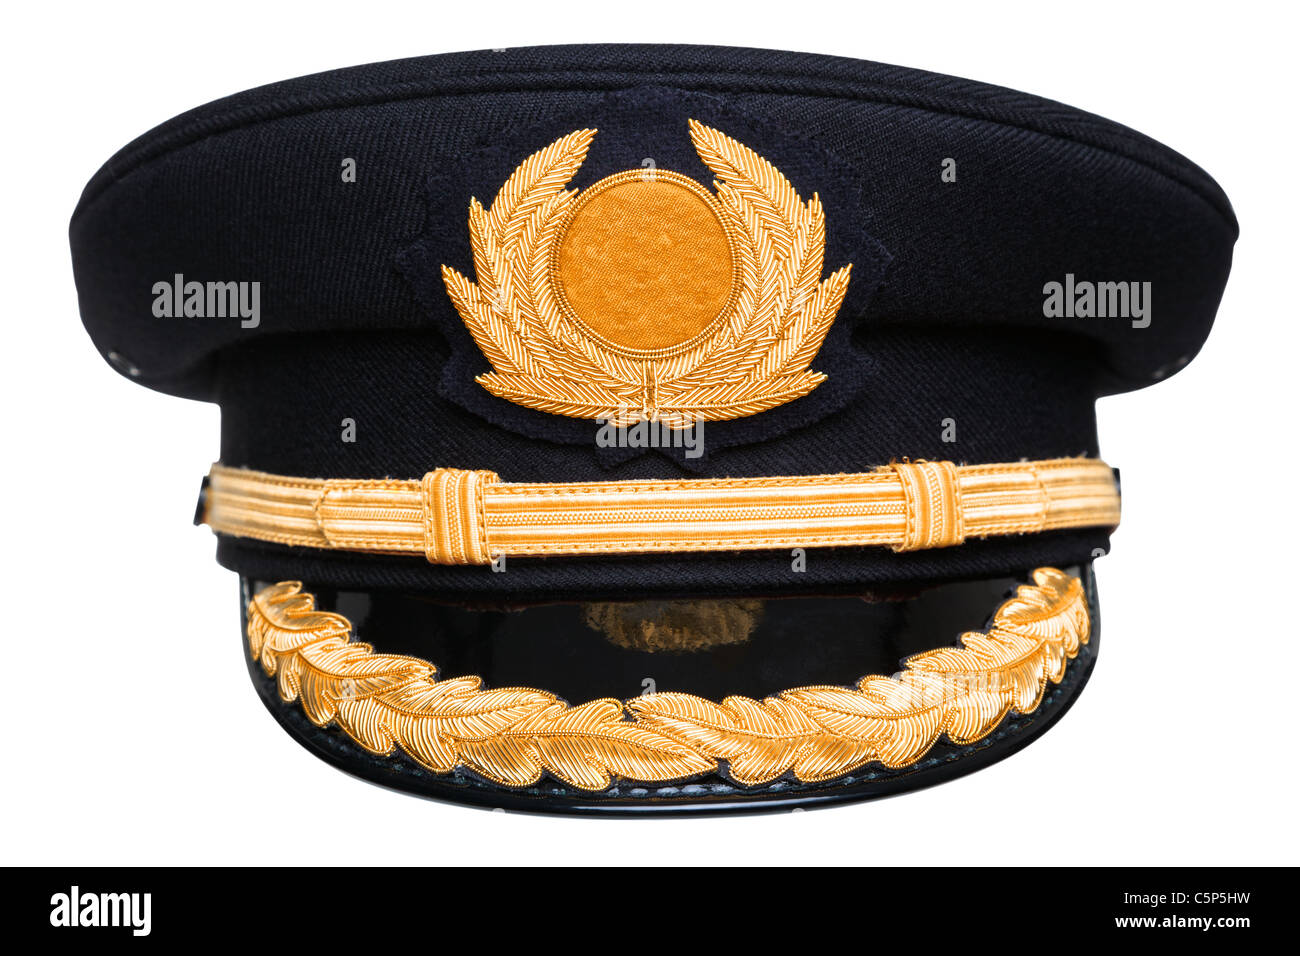 Photo of an airline pilots hat or cap with gold insignia, isolated on a white background with clipping path. Stock Photo